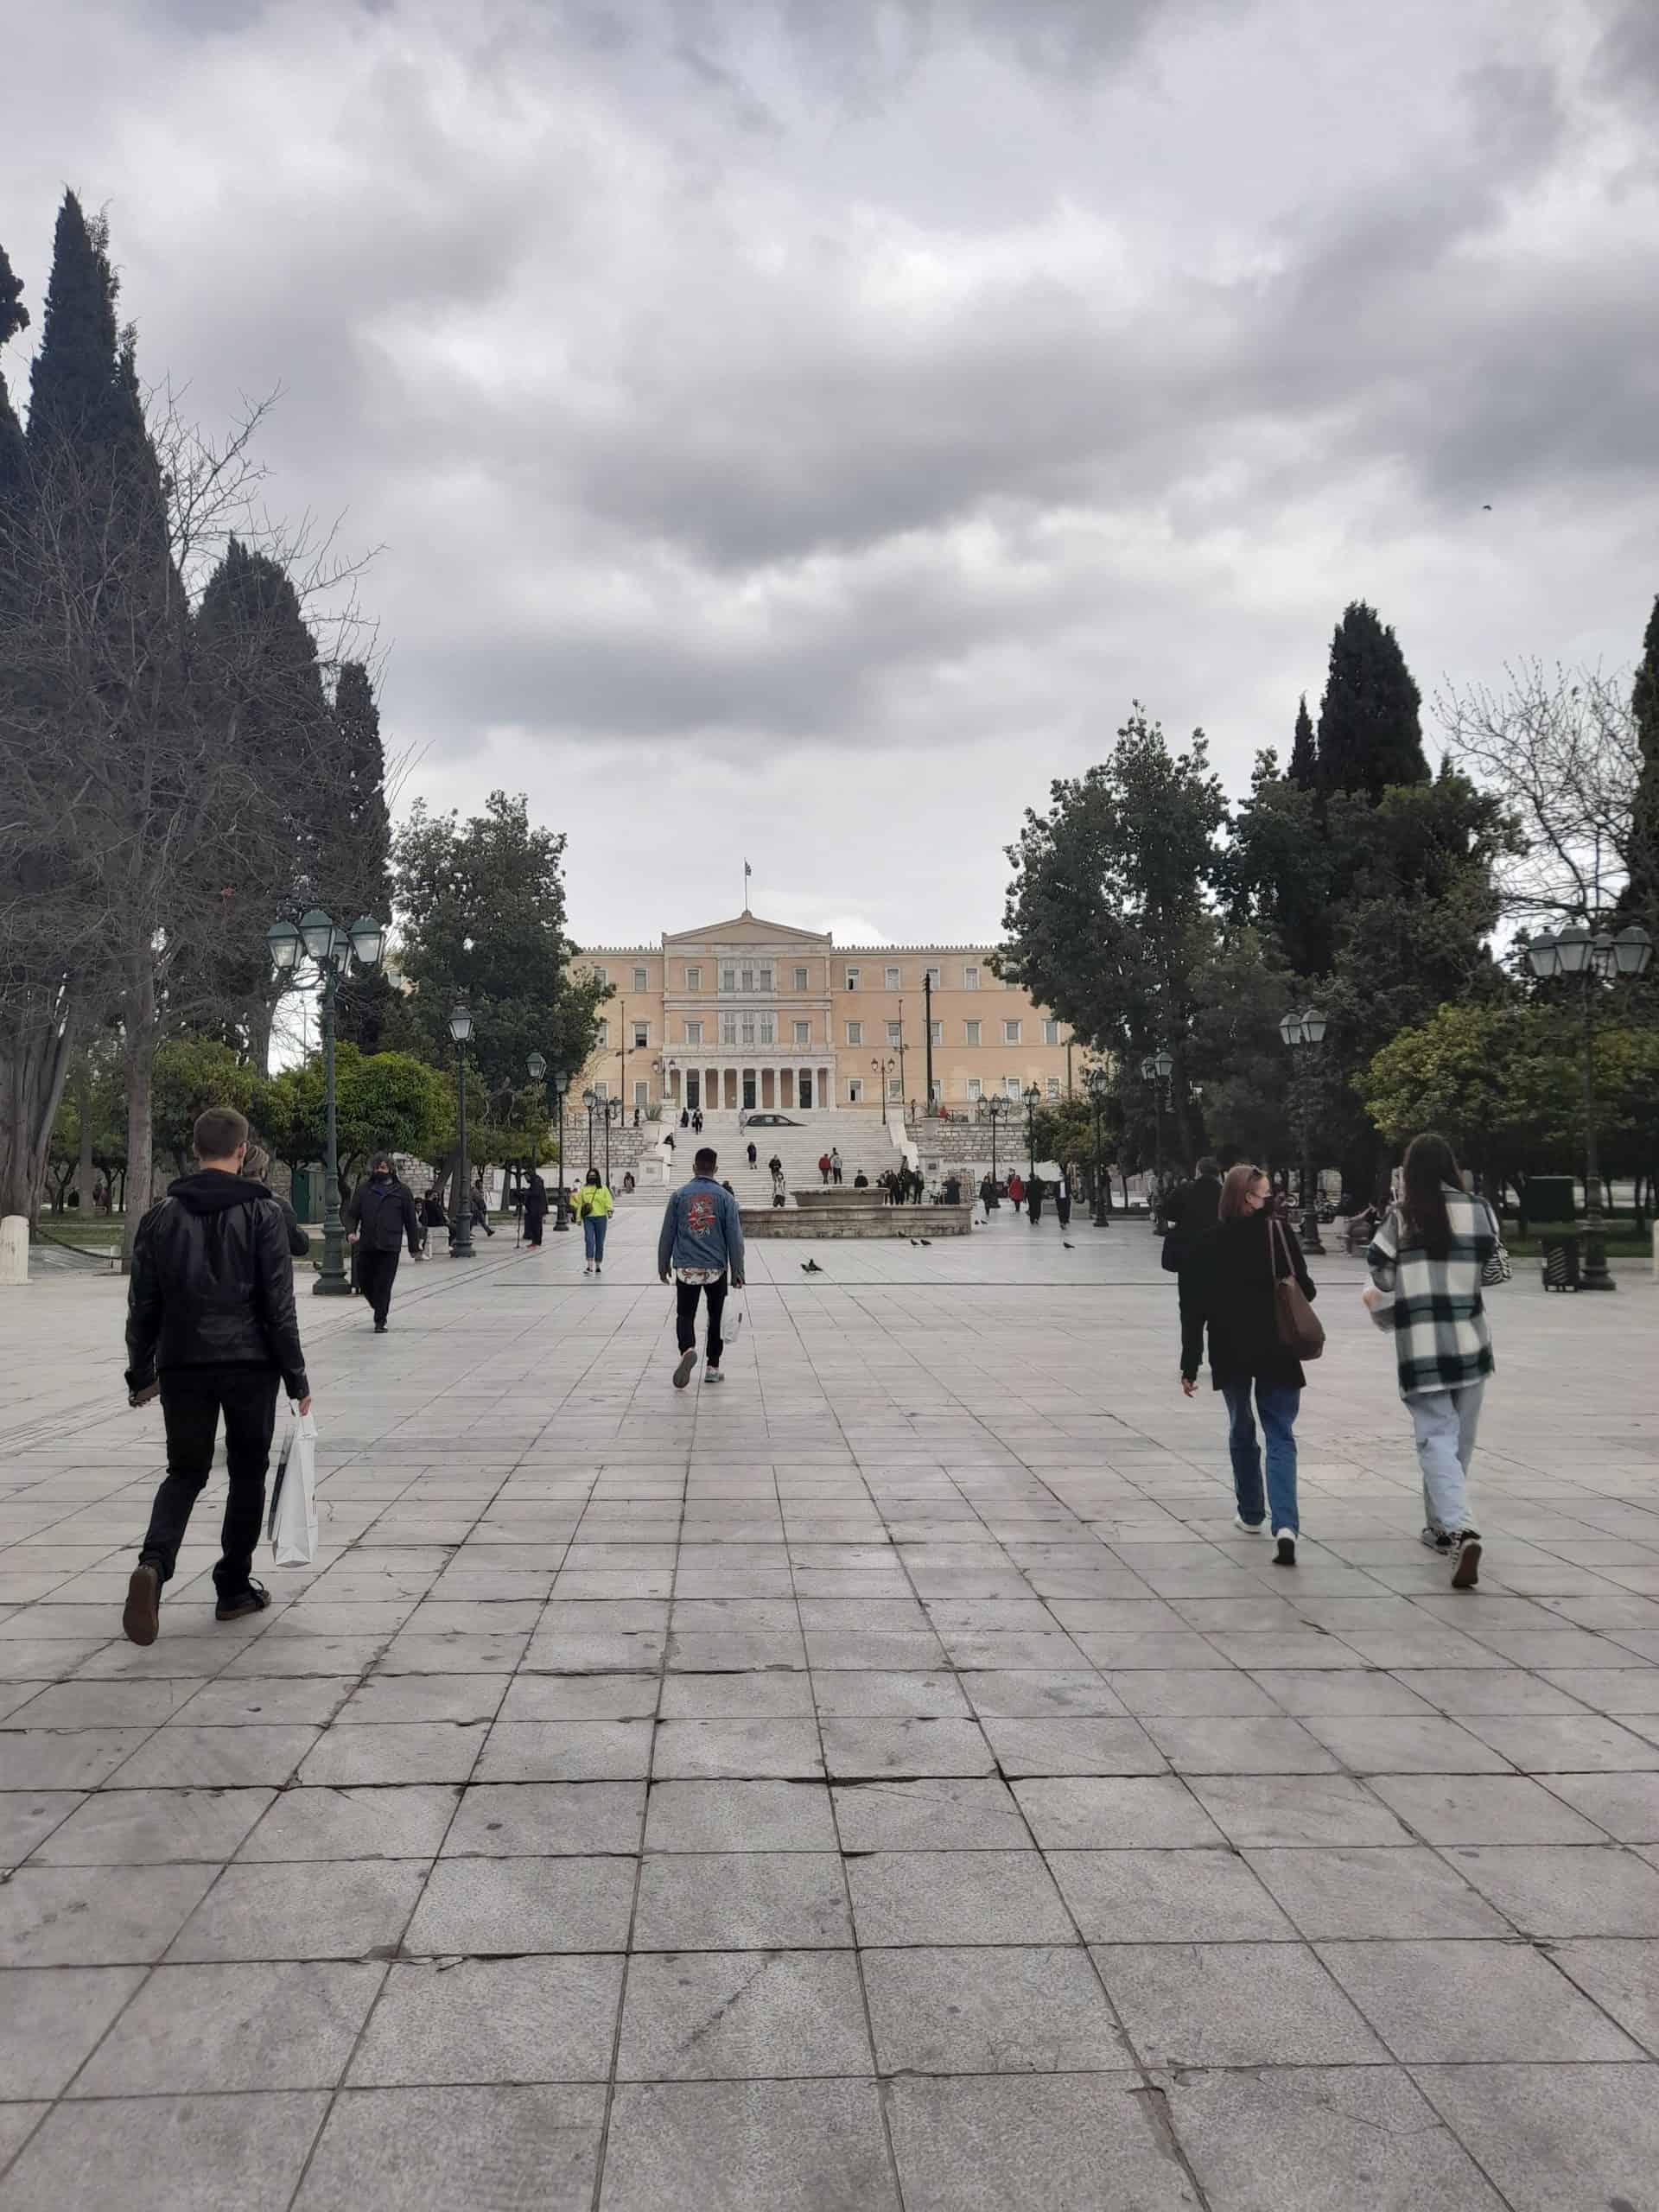 Syntagma marks the heart of the city of Athens